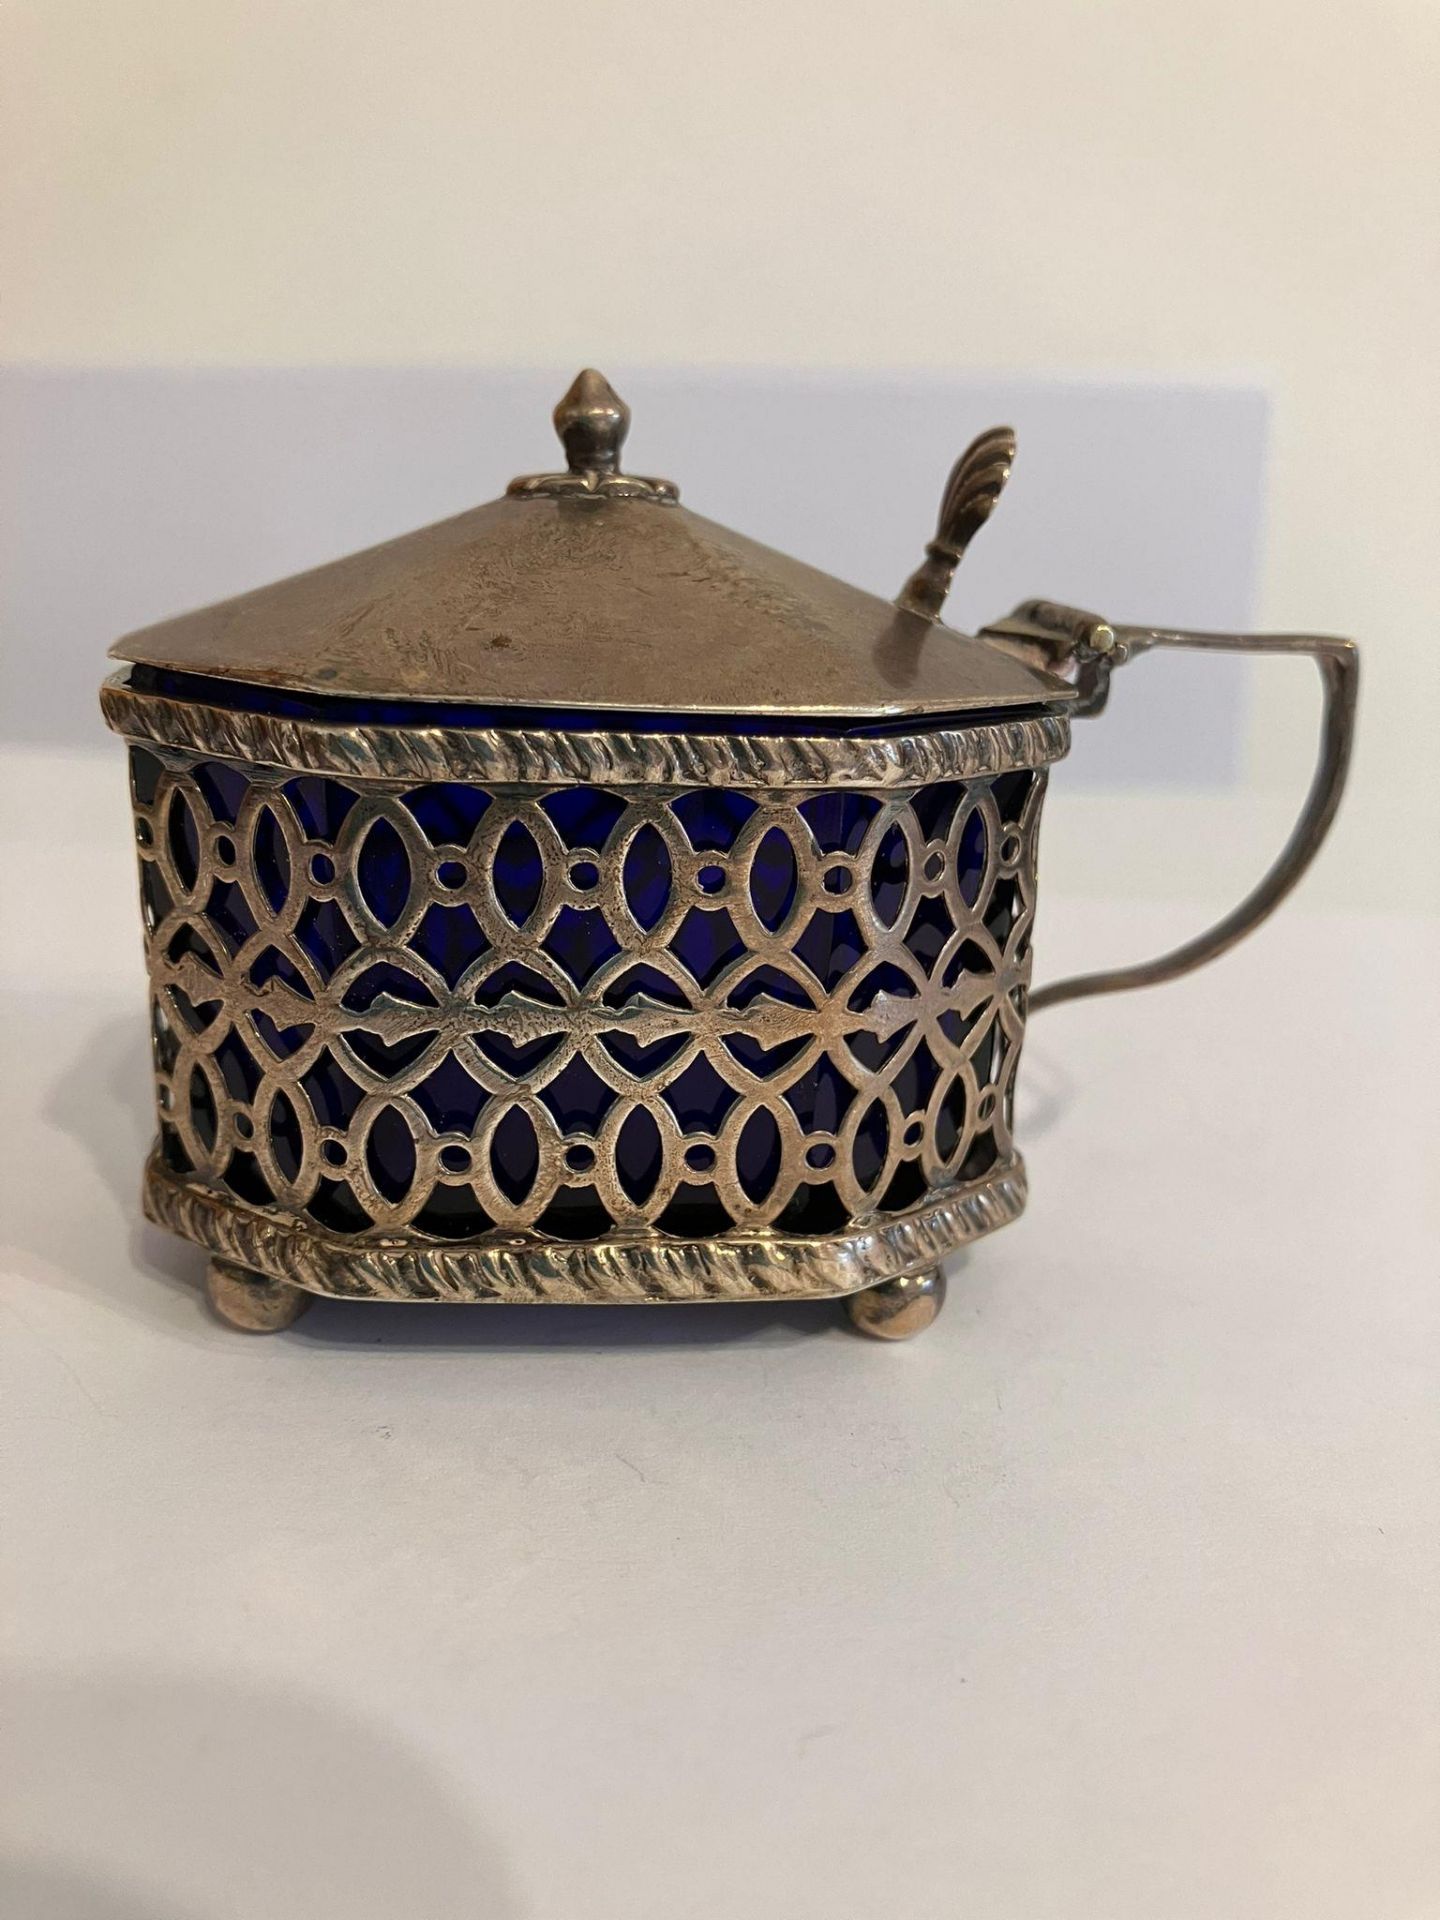 Antique SILVER MUSTARD POT, Octagonal Shape, with fabulous filigree work all round. Hinge in perfect